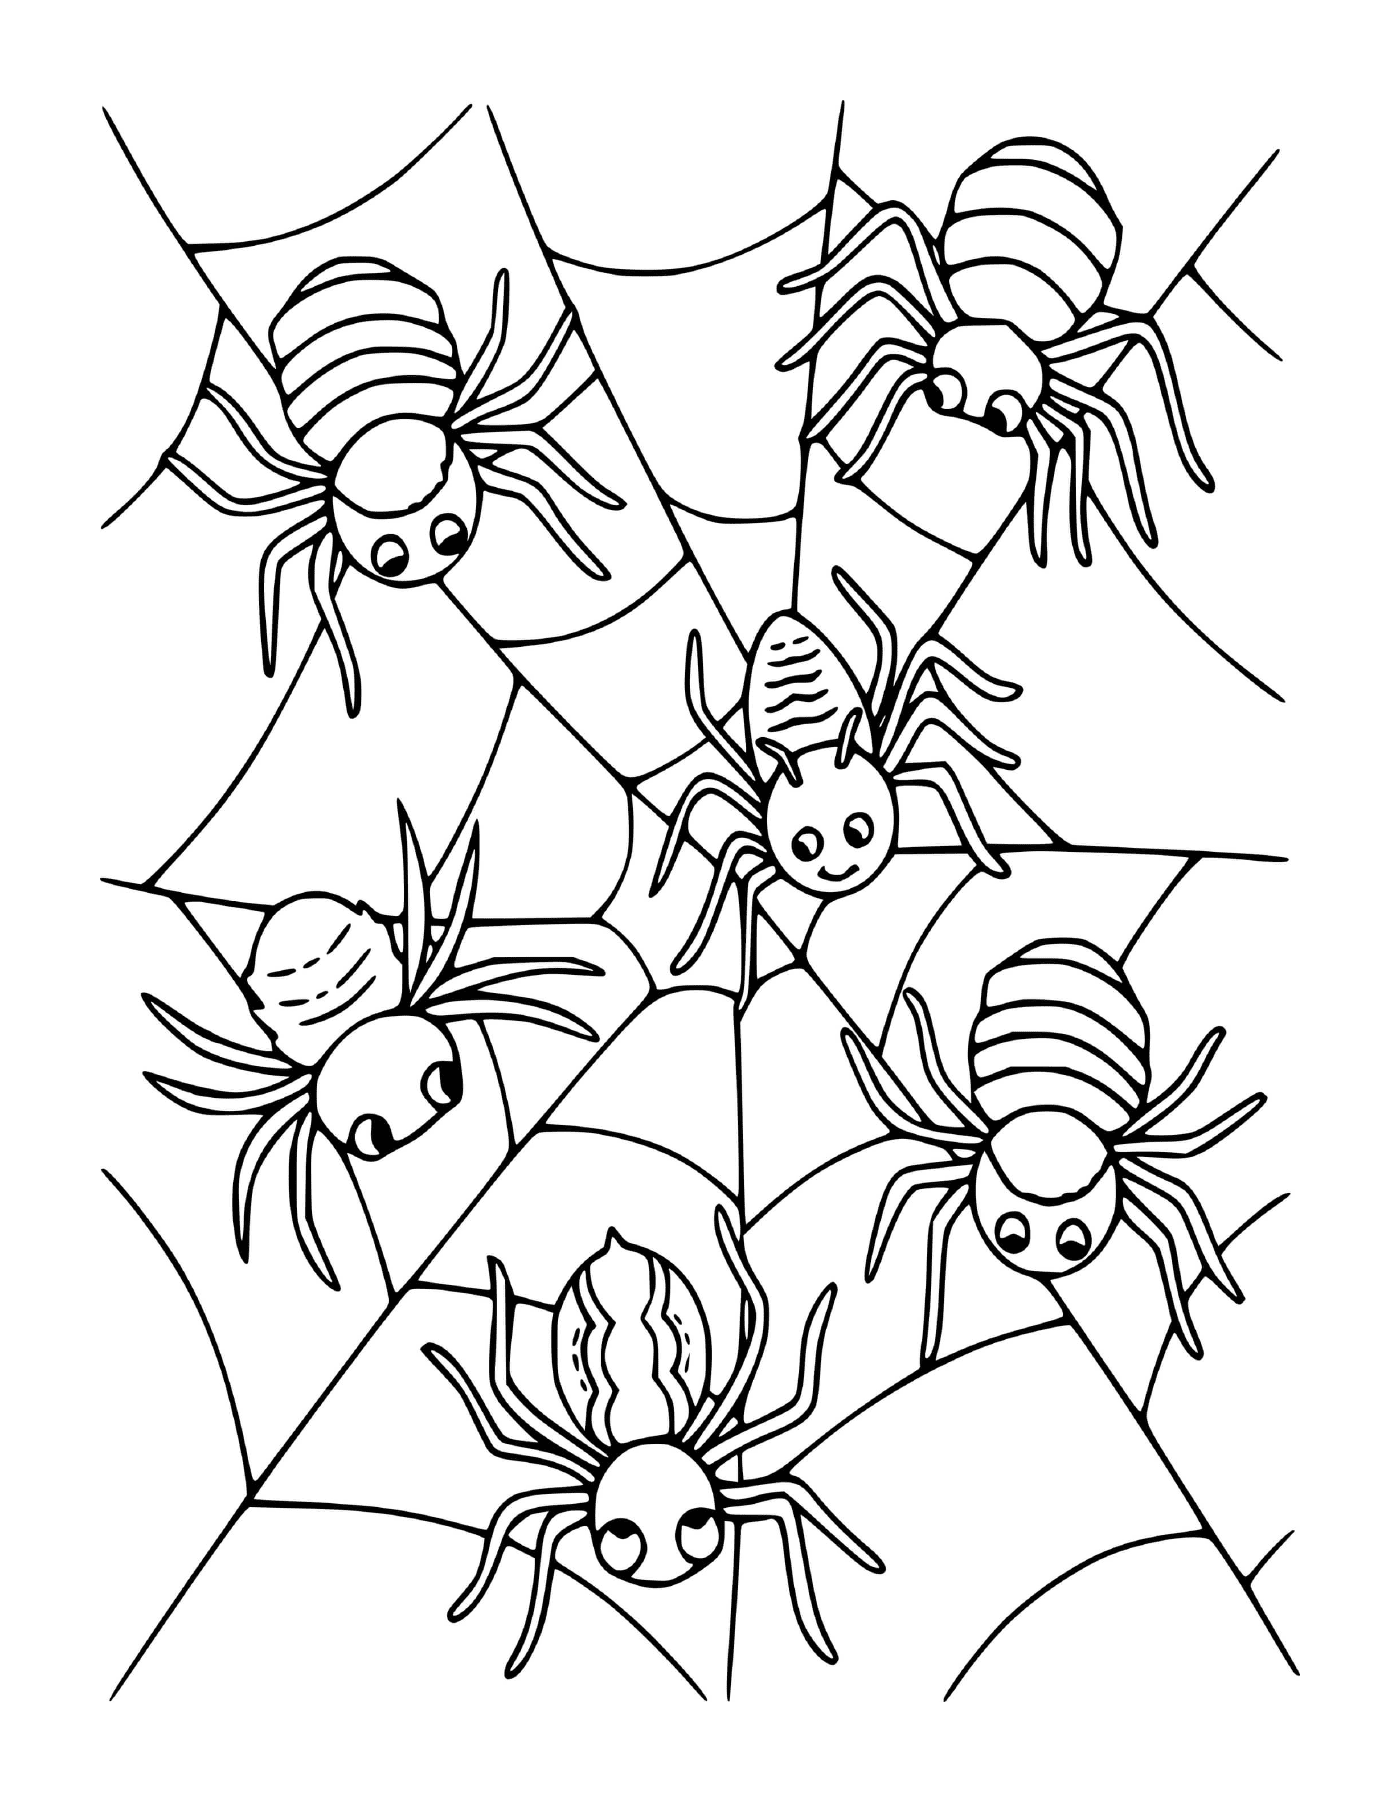  A group of four spiders sitting on a web 